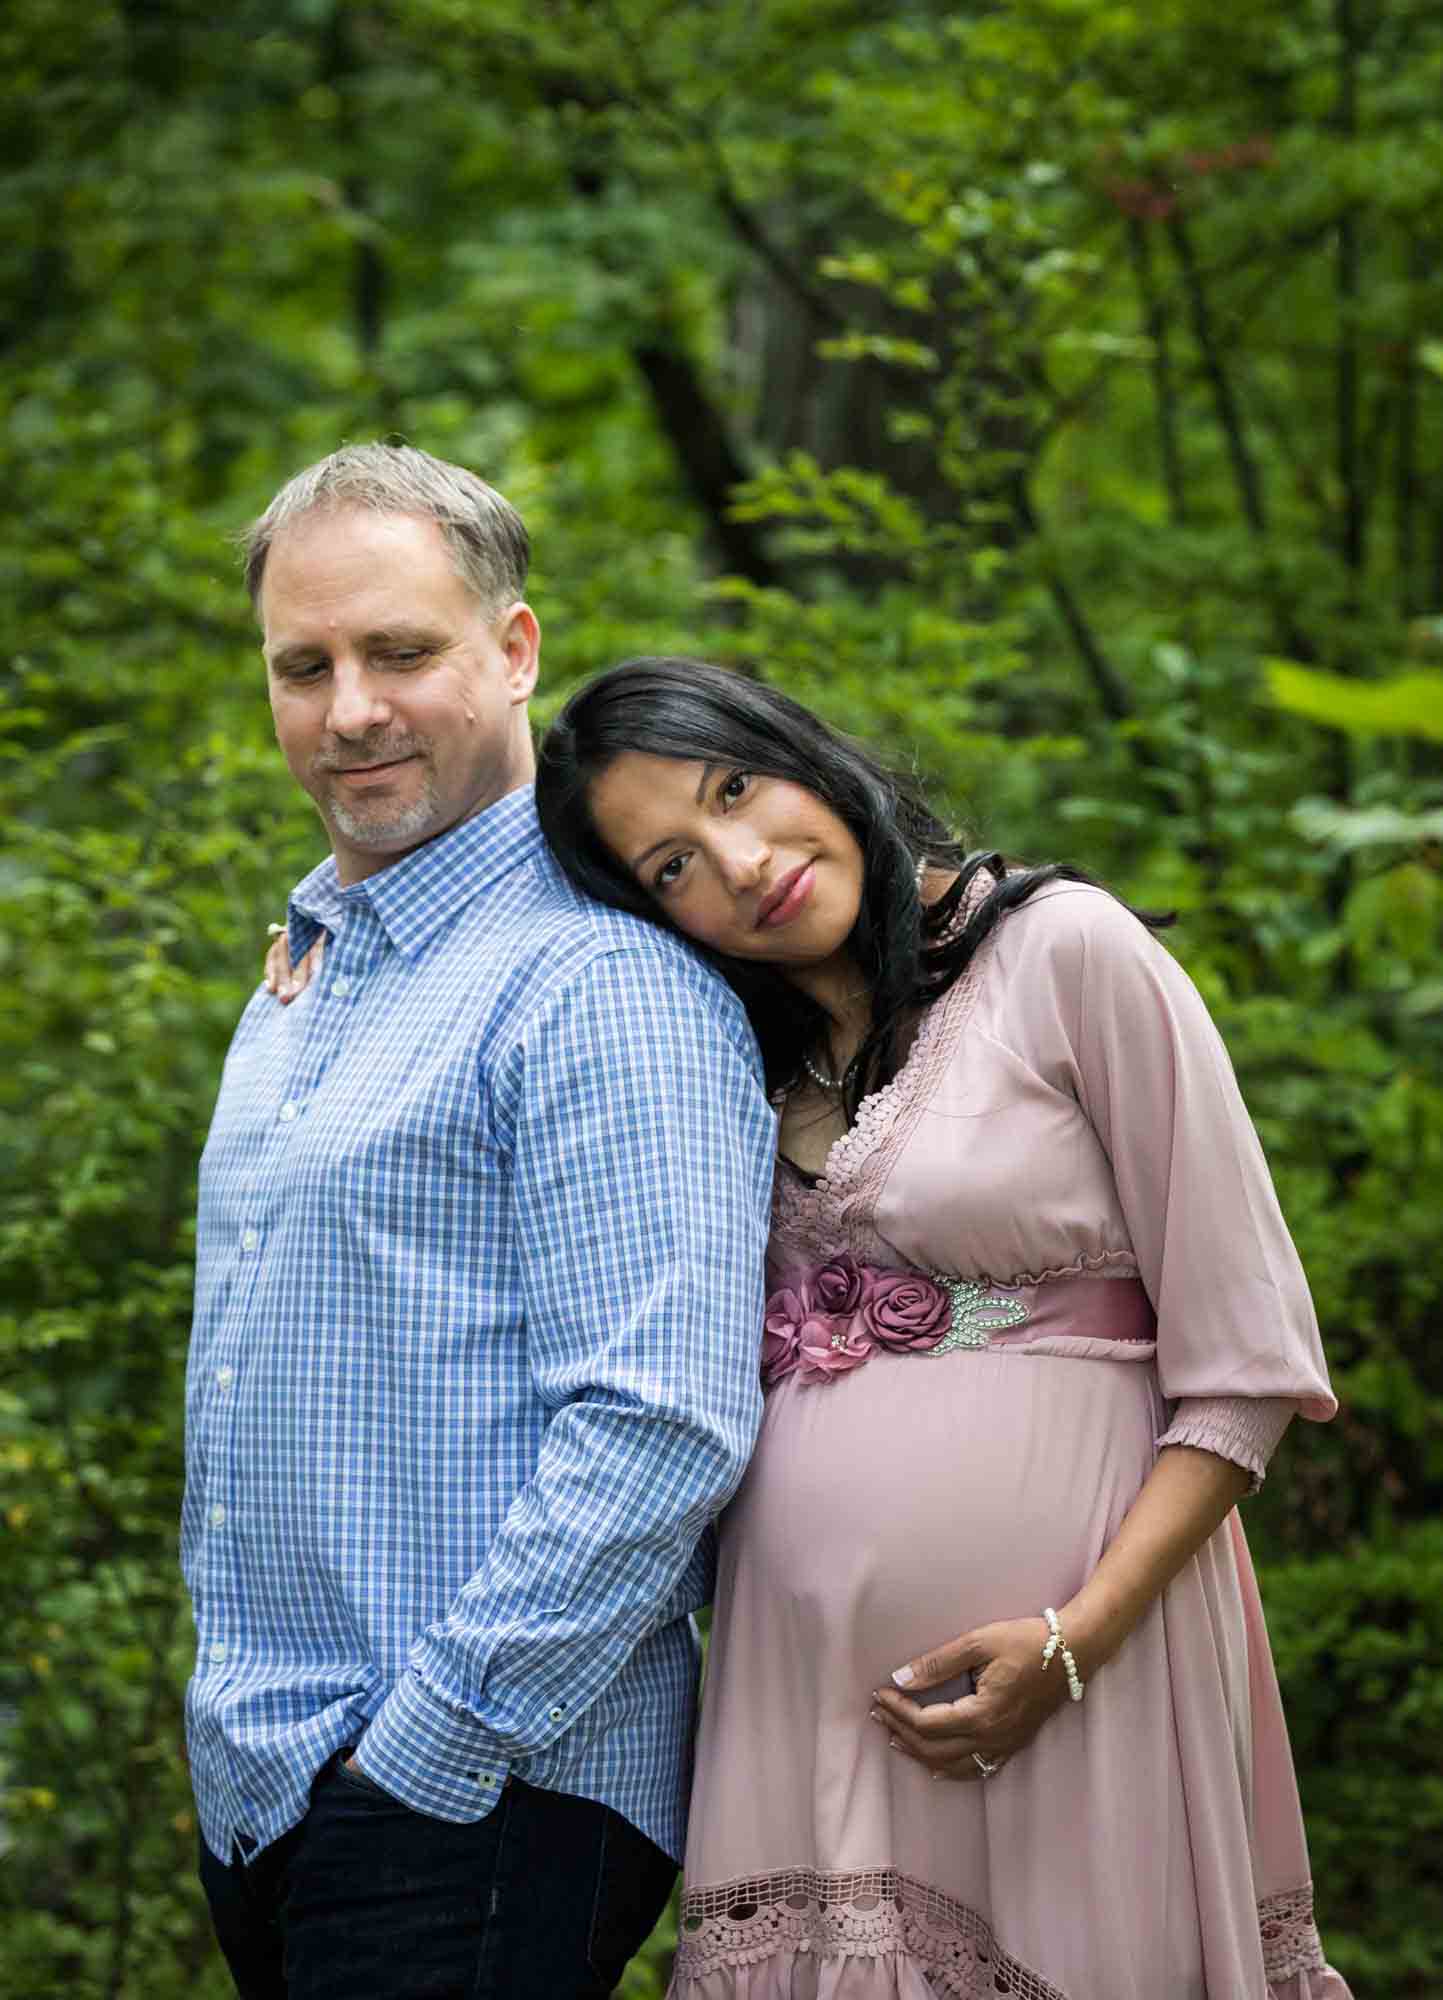 Forest Park maternity photos of a couple standing in a forest with woman's head on man's shoulder